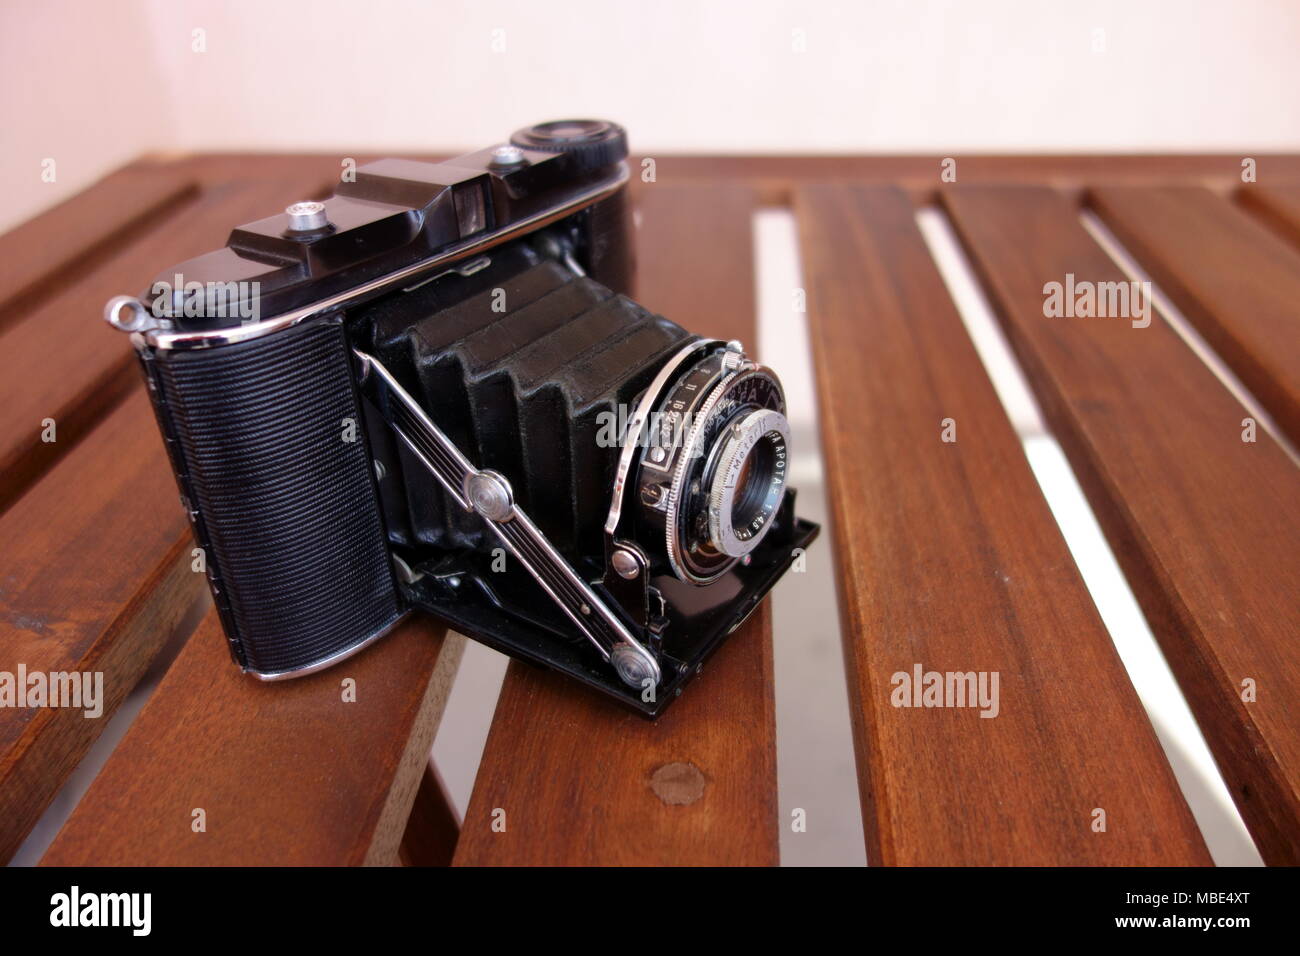 Vintage photo camera with lens contraption open Stock Photo